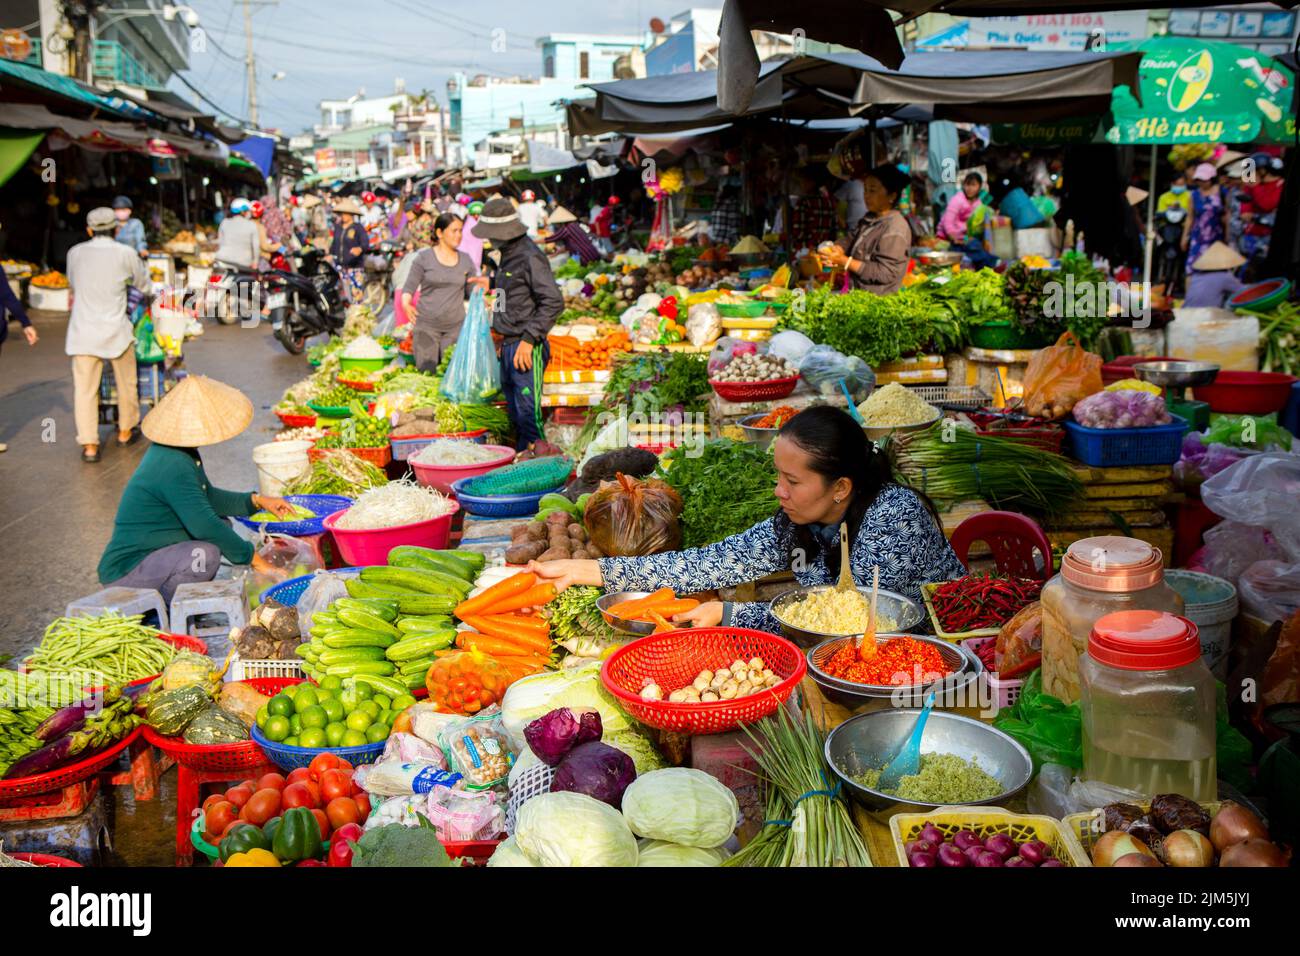 Duong Dong, Phu Quoc Island, Vietnam - January 25, 2018: Vietnamese market vendors selling fresh vegetables at the Duong Dong Market located in Duong Stock Photo